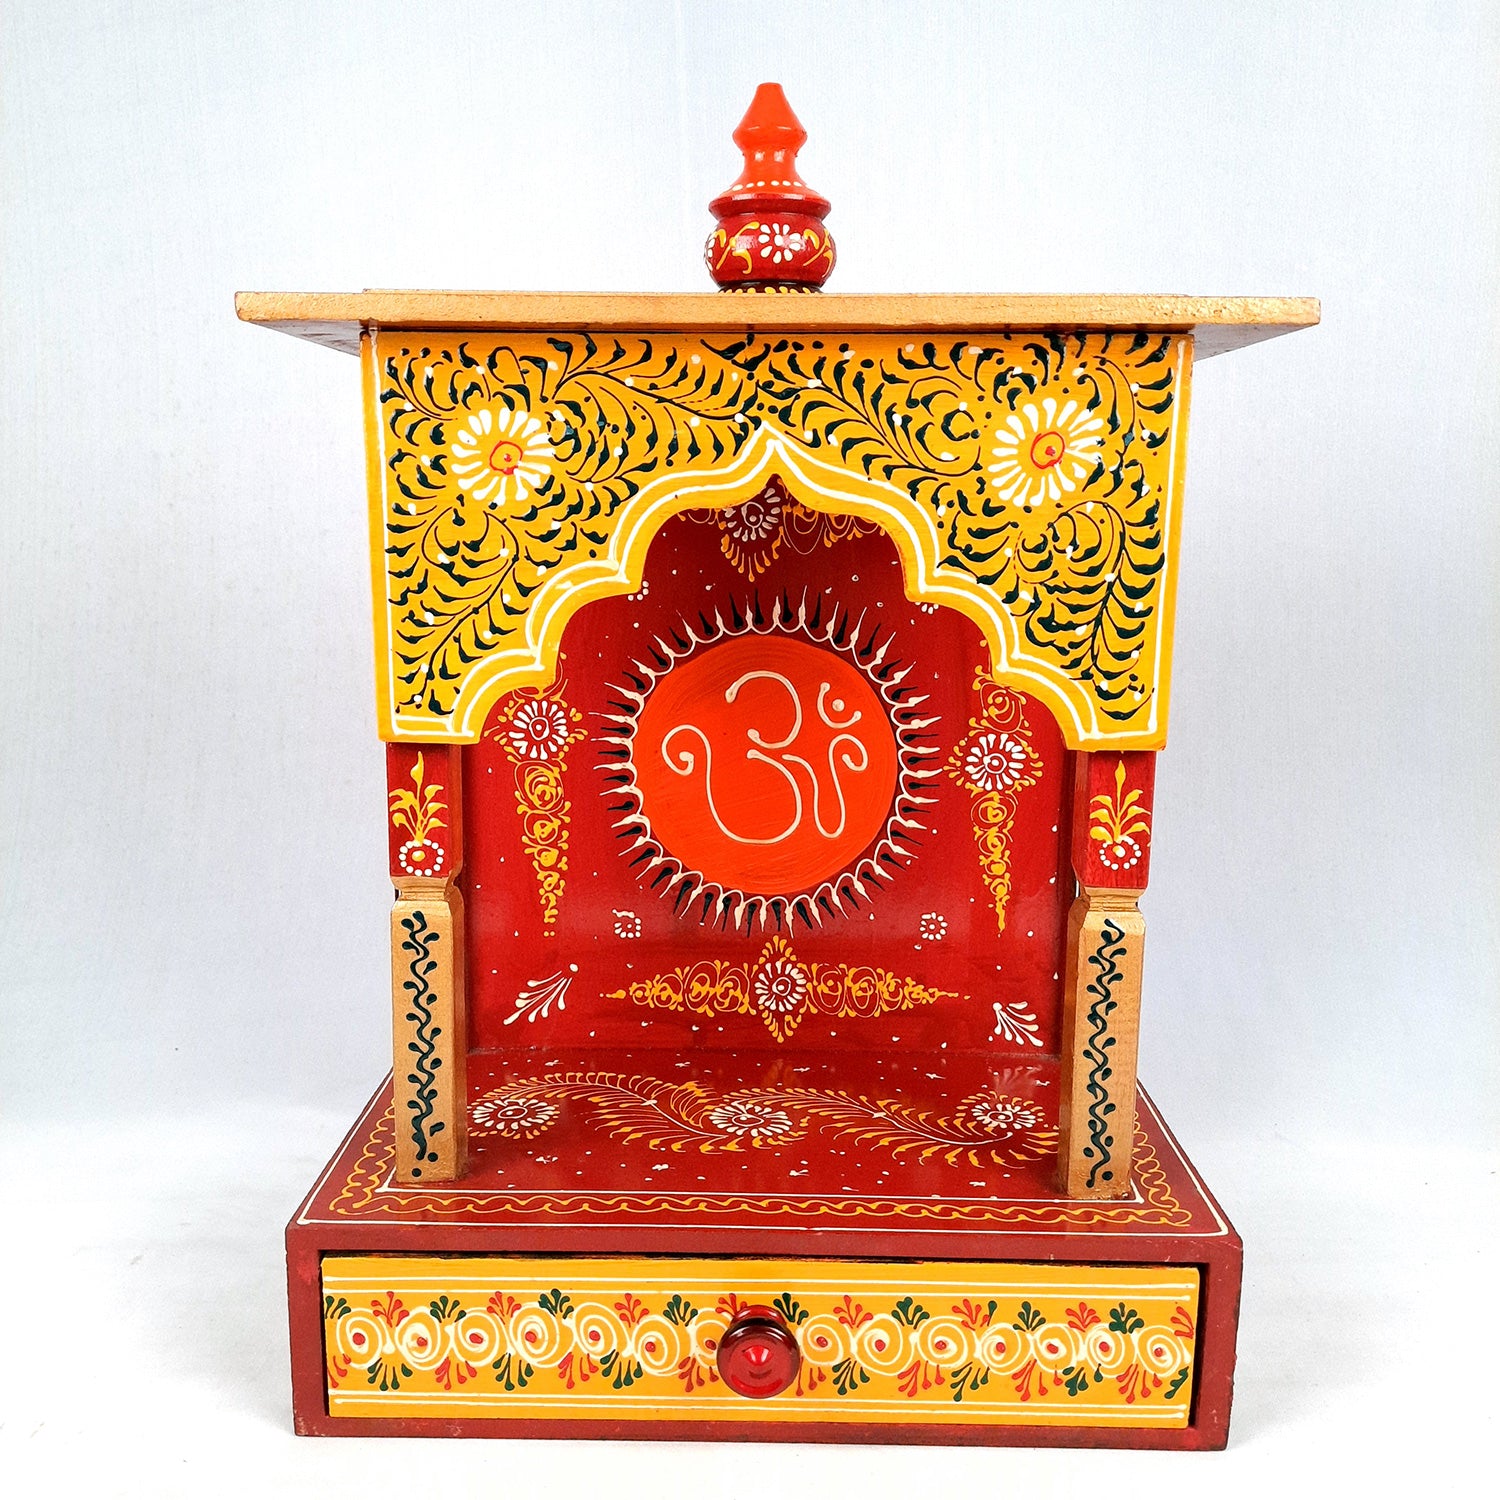 Pooja Temple Wooden With Storage Drawer | Mandir For Home | Puja Stand / Mandap Wall Mounted - For Religious Decor, House, Ghar, Office, Shop - Apkamart #Size_17 inch